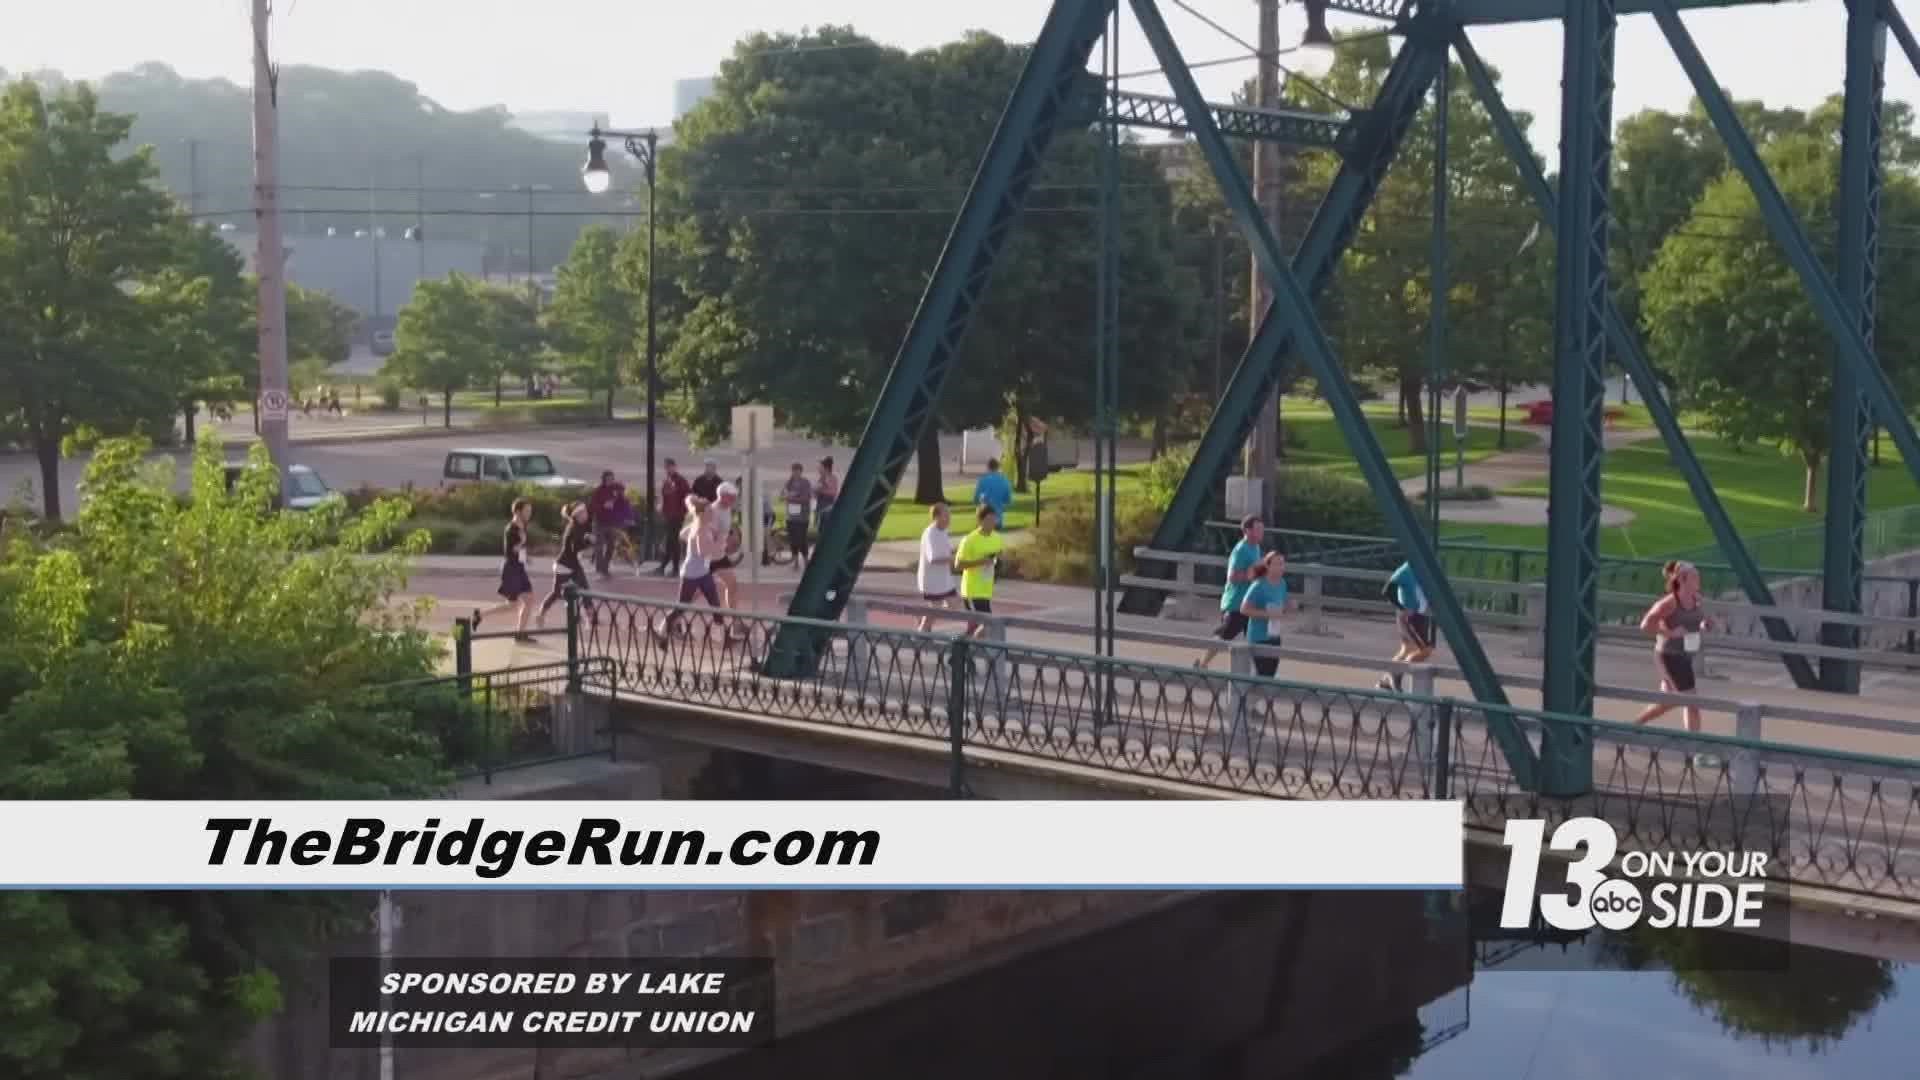 The event offers a 10 Mile Run and 5k Run/Walk, all of which wind their way through downtown Grand Rapids and cross some of the city’s historic bridges.